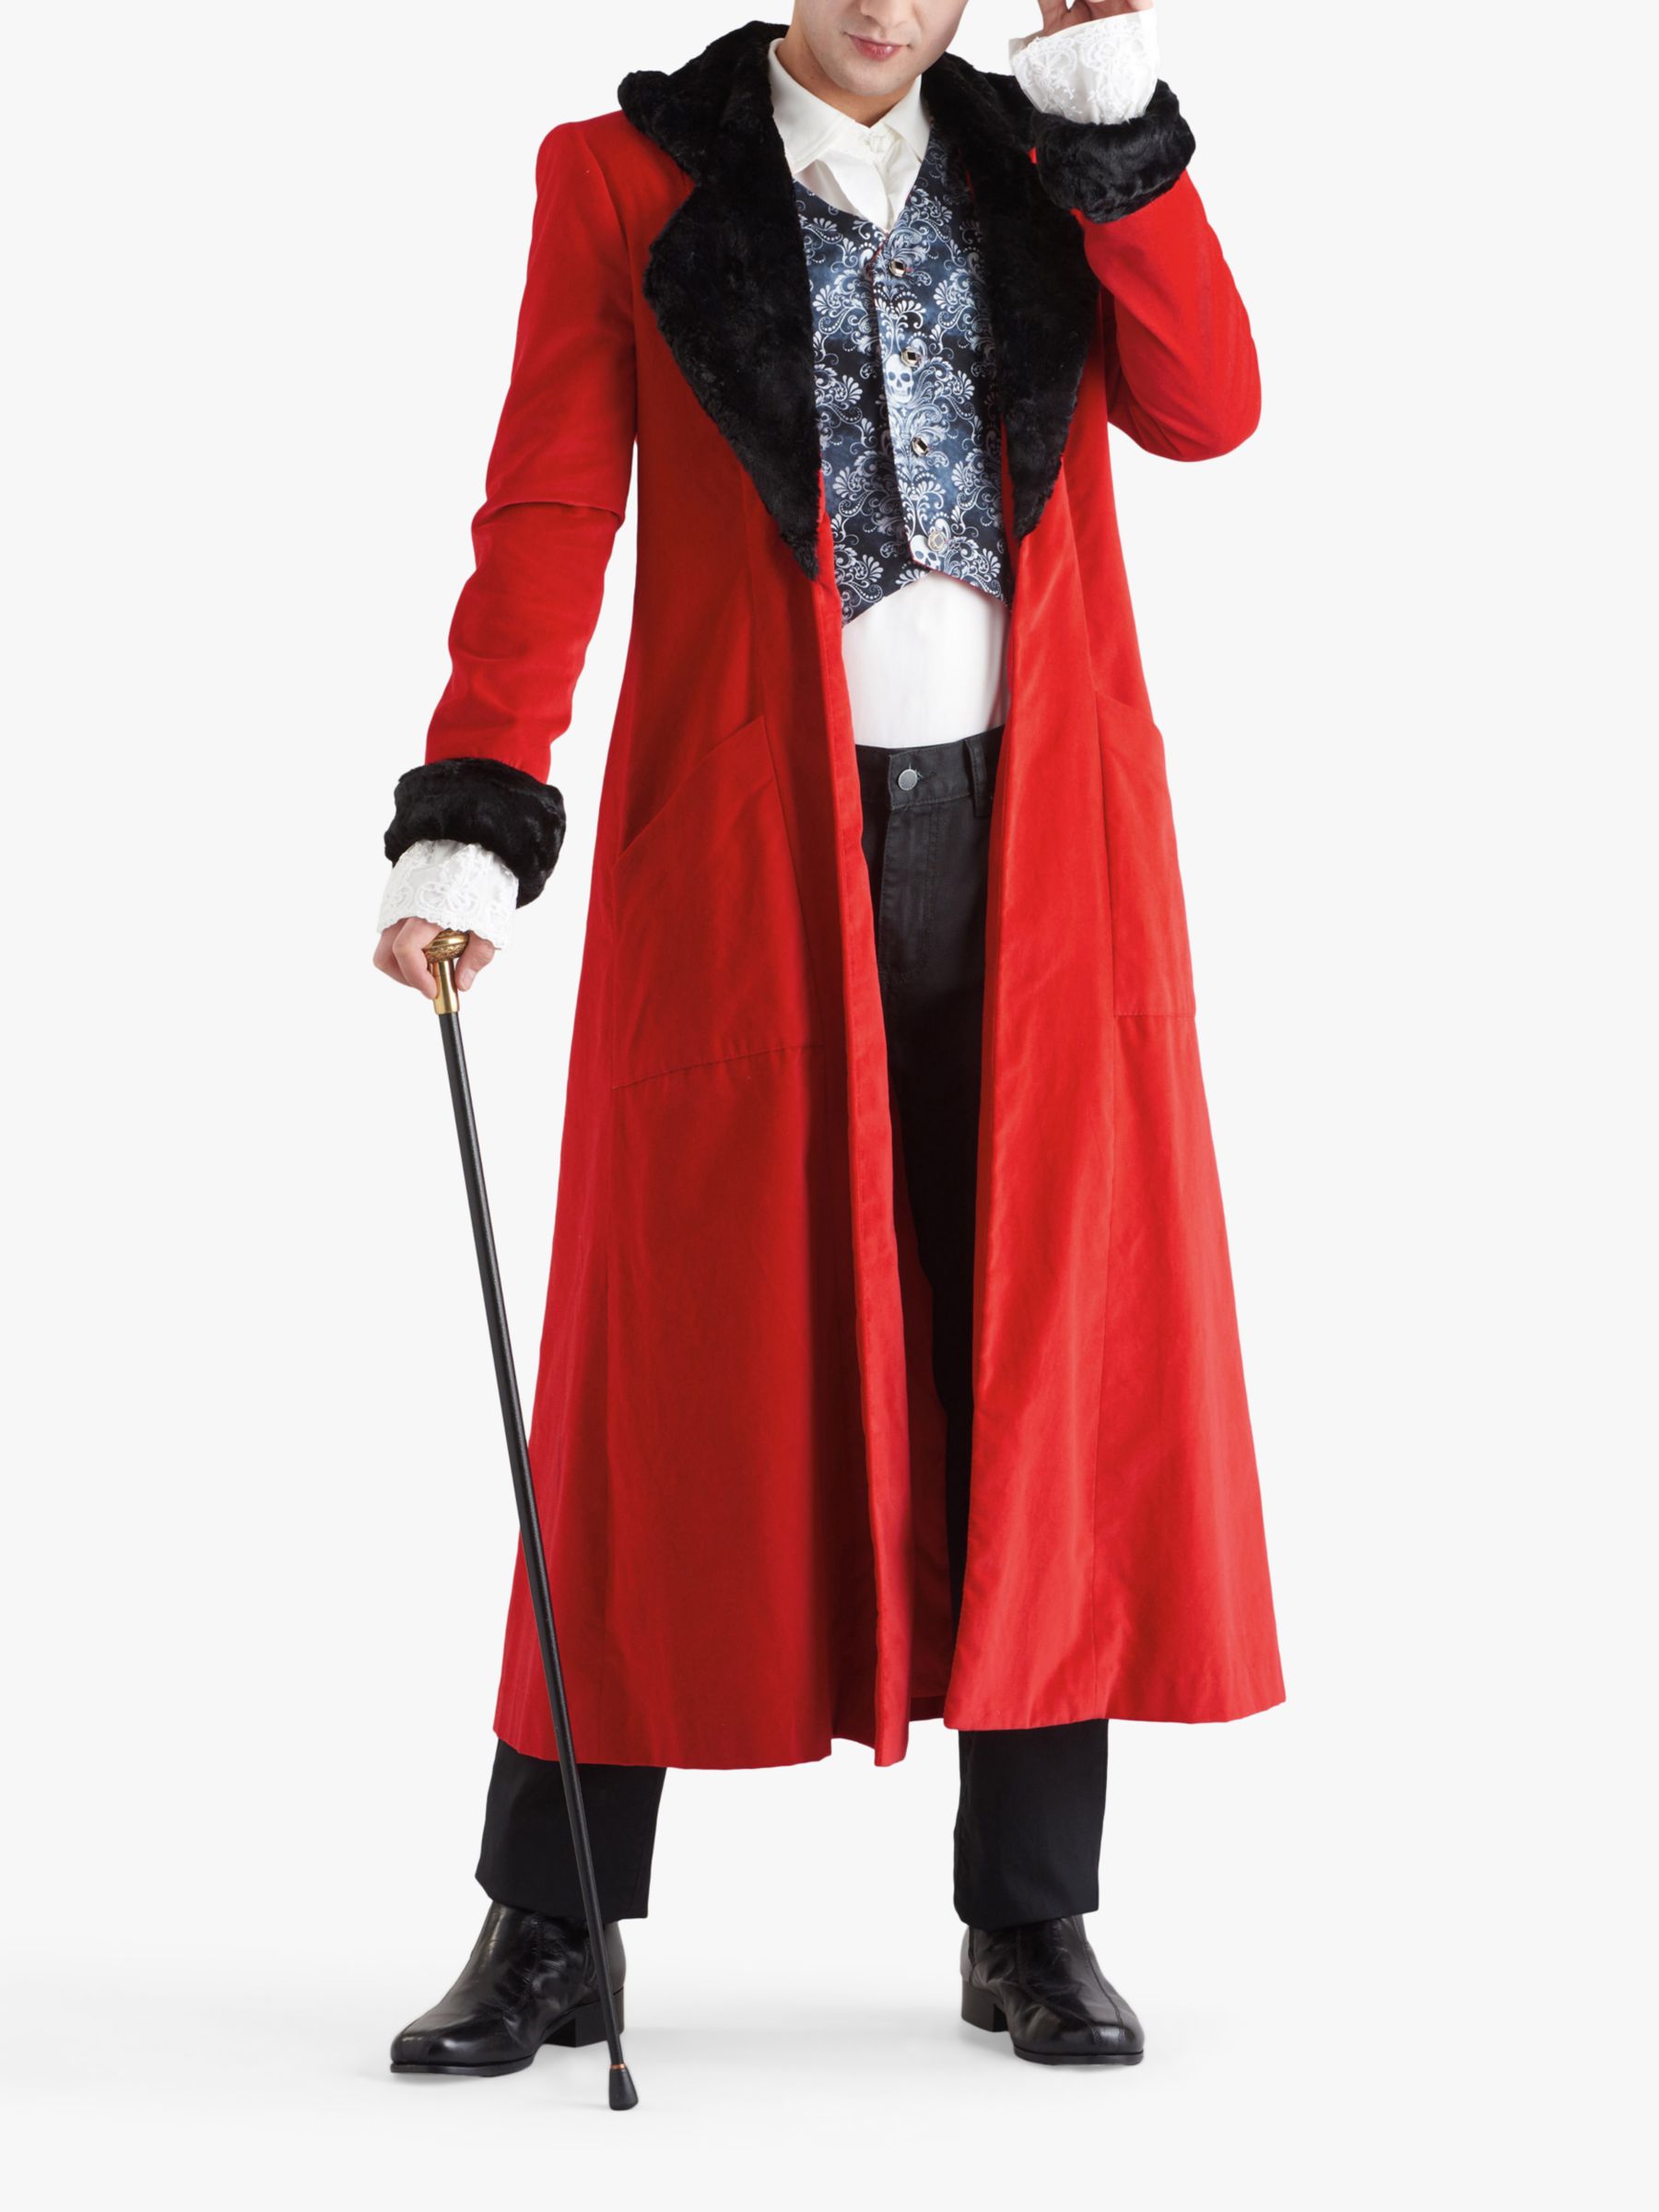 VICTORIAN GENTS ENSEMBLE-Costume Couture Pattern-Long Great Coat